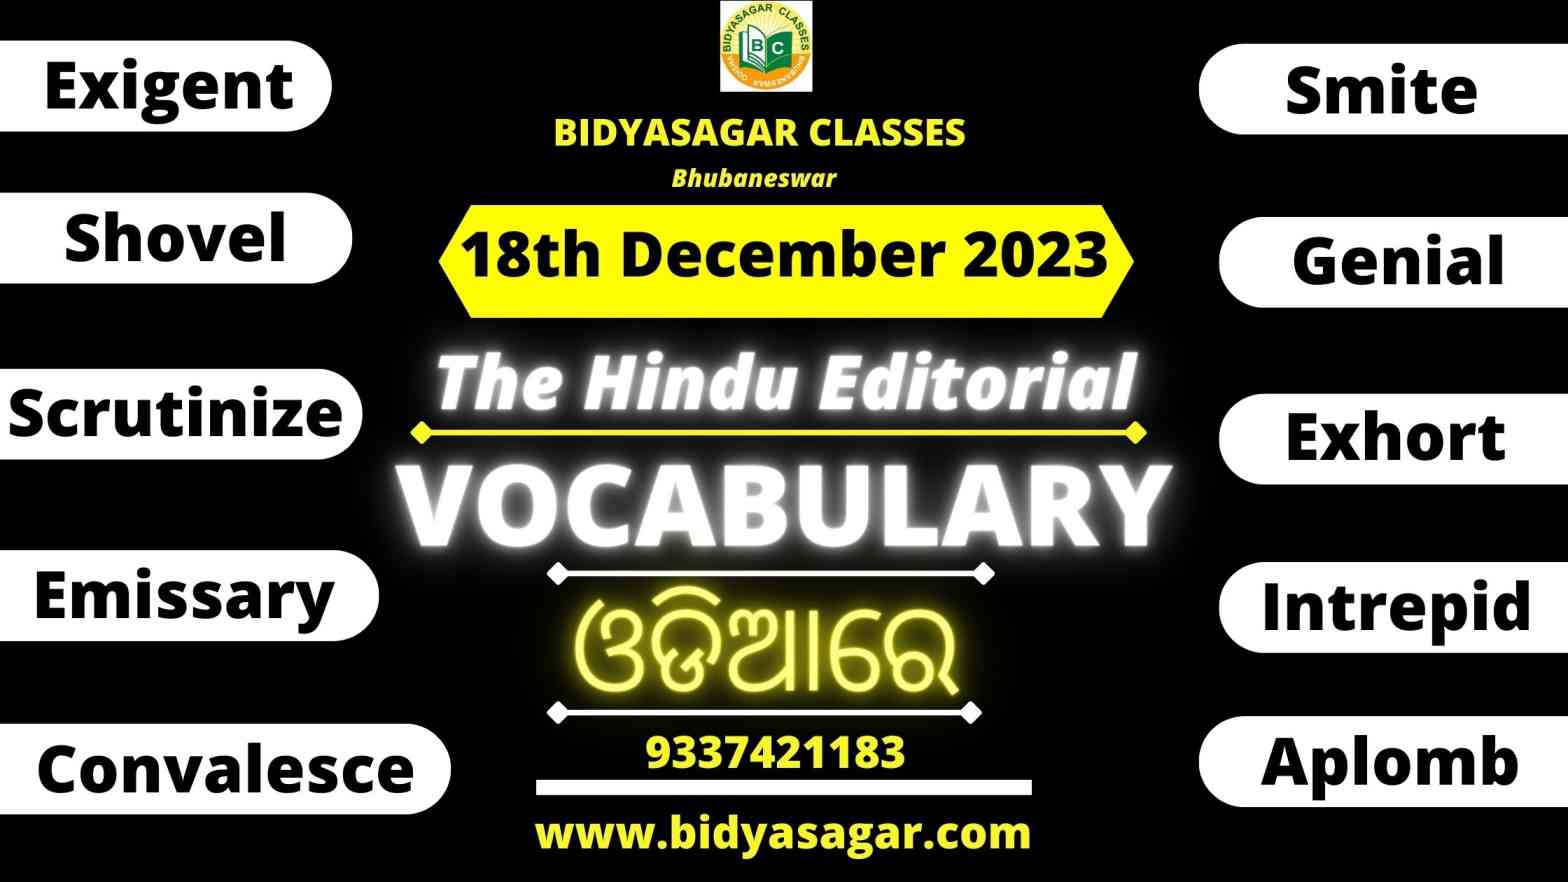 The Hindu Editorial Vocabulary of 18th December 2023